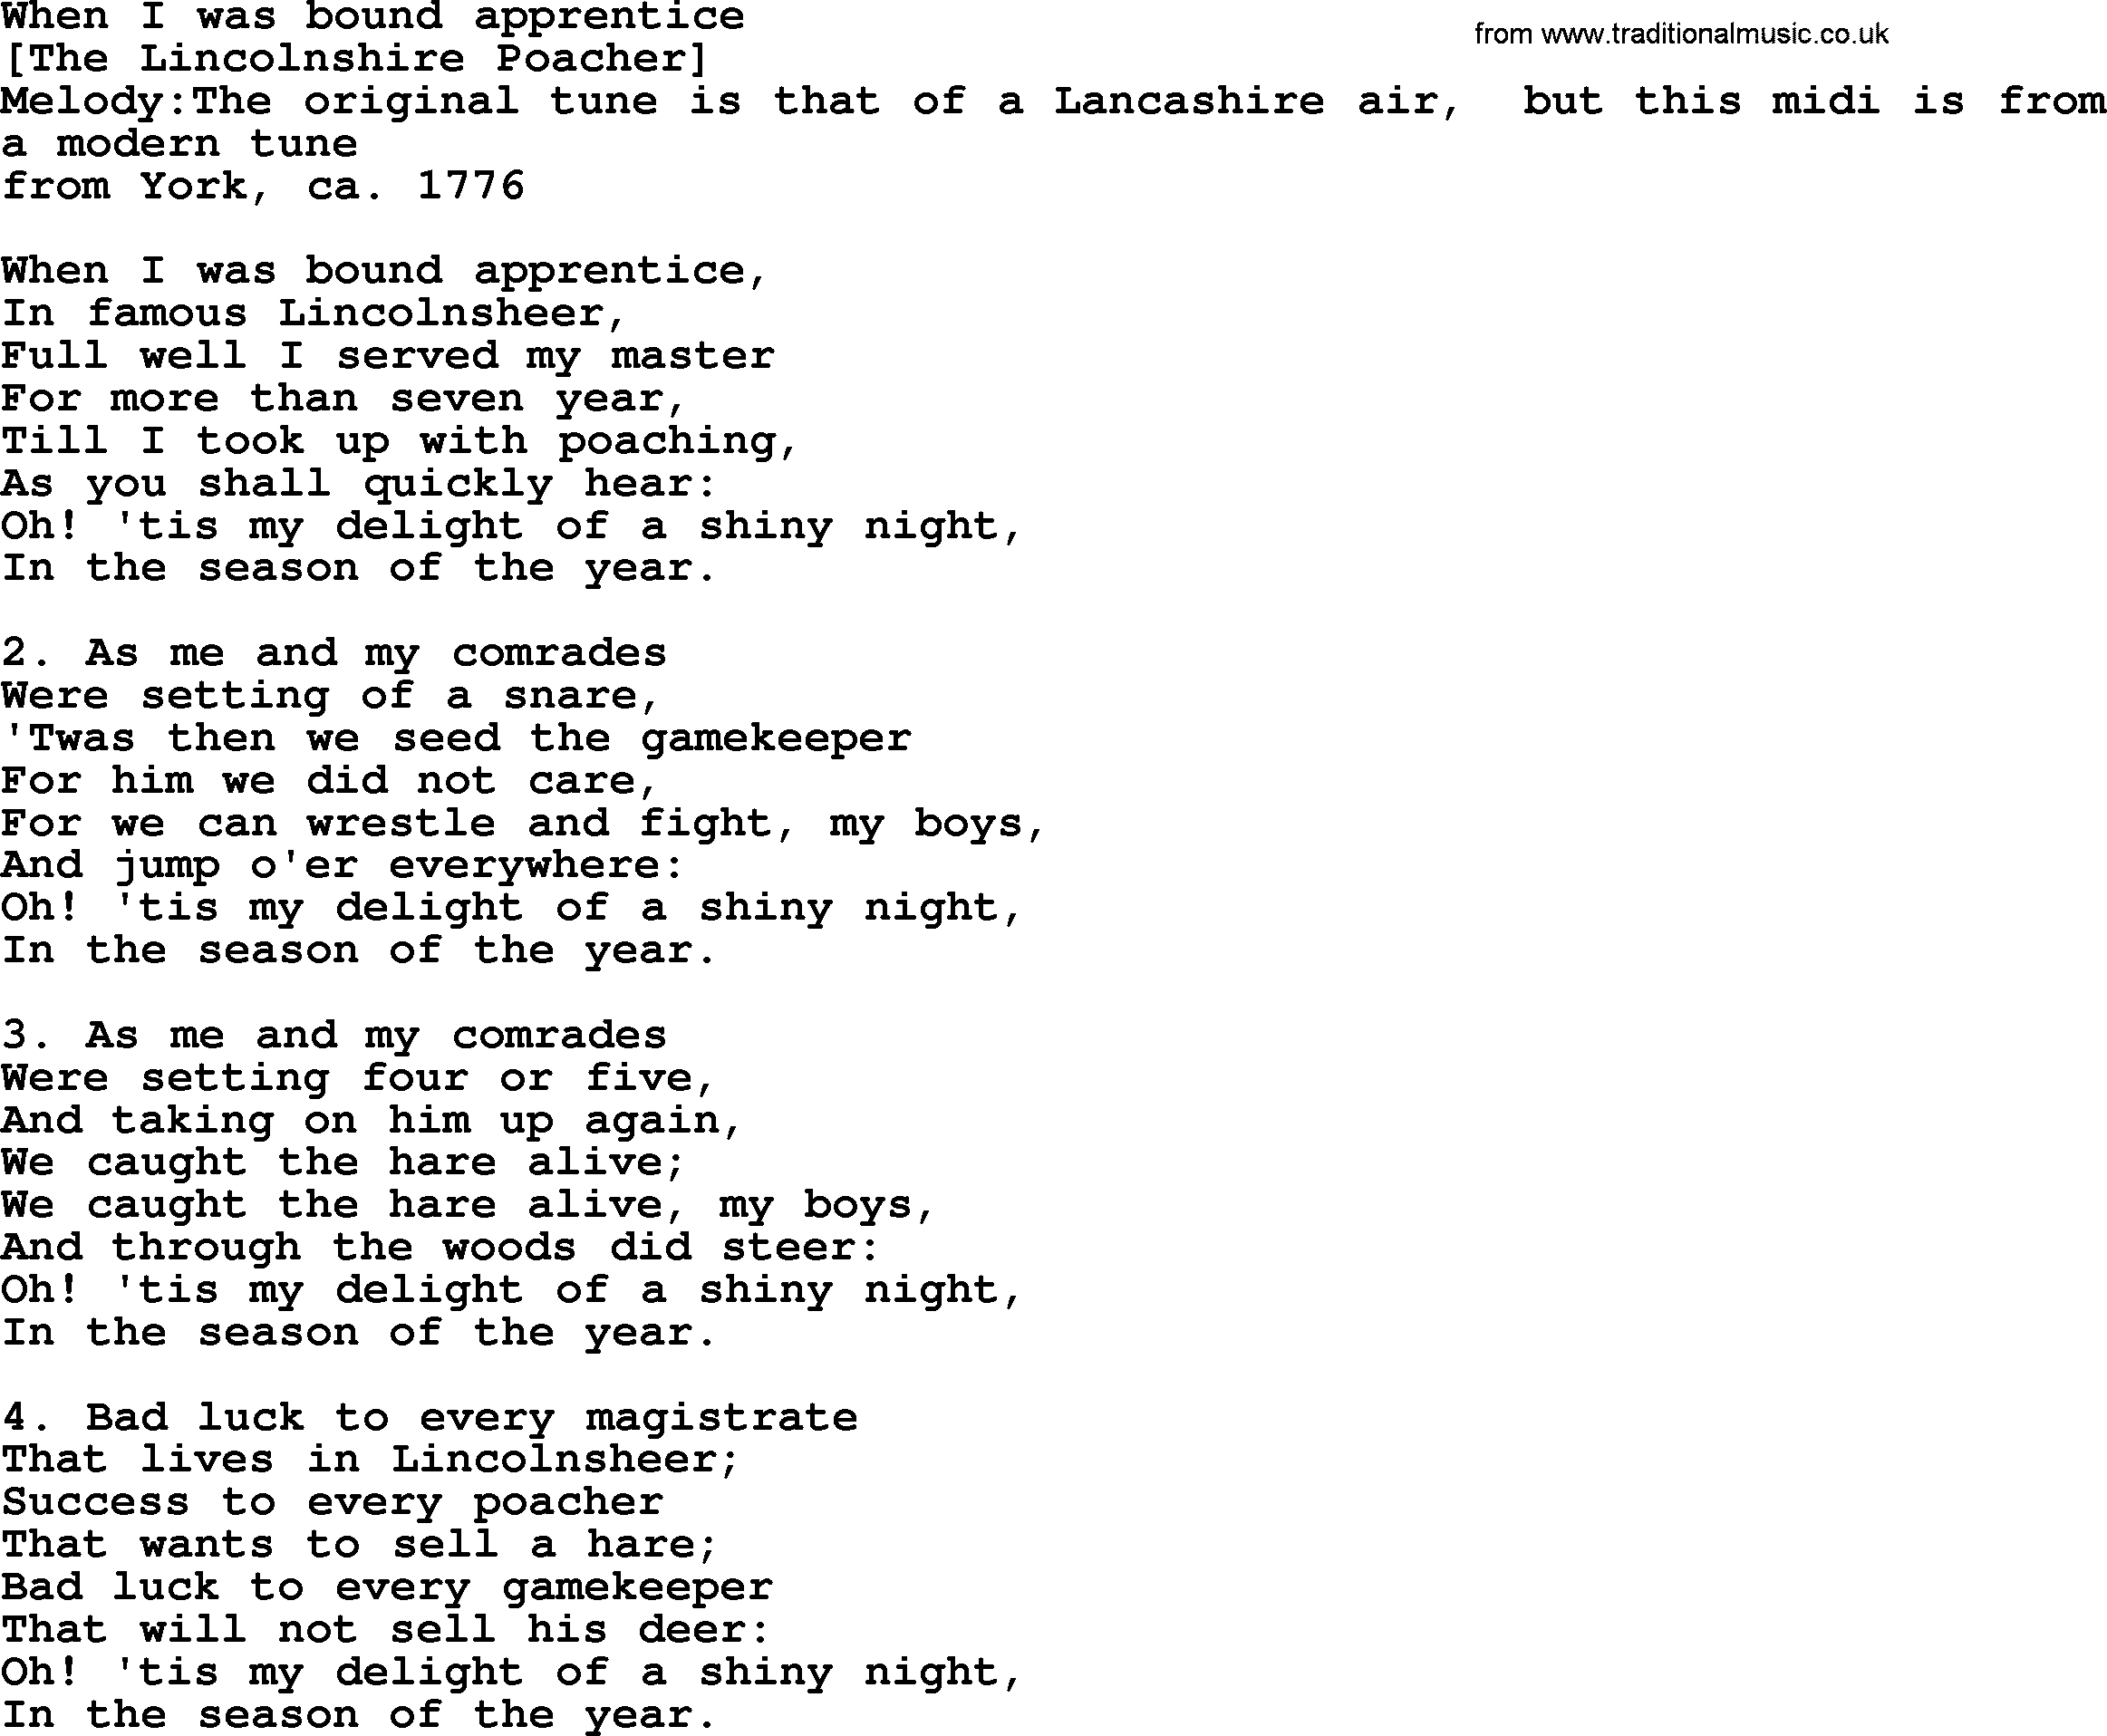 Old English Song: When I Was Bound Apprentice lyrics